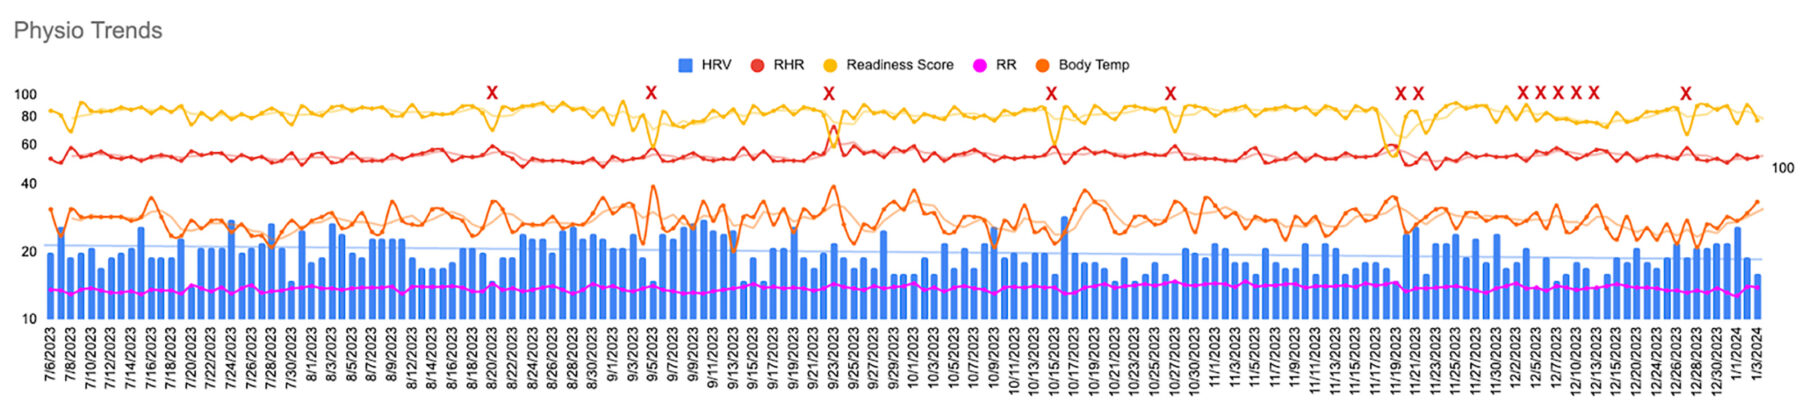 Physiological trends chart showing how the readiness score is affected by Heart Rate Variables